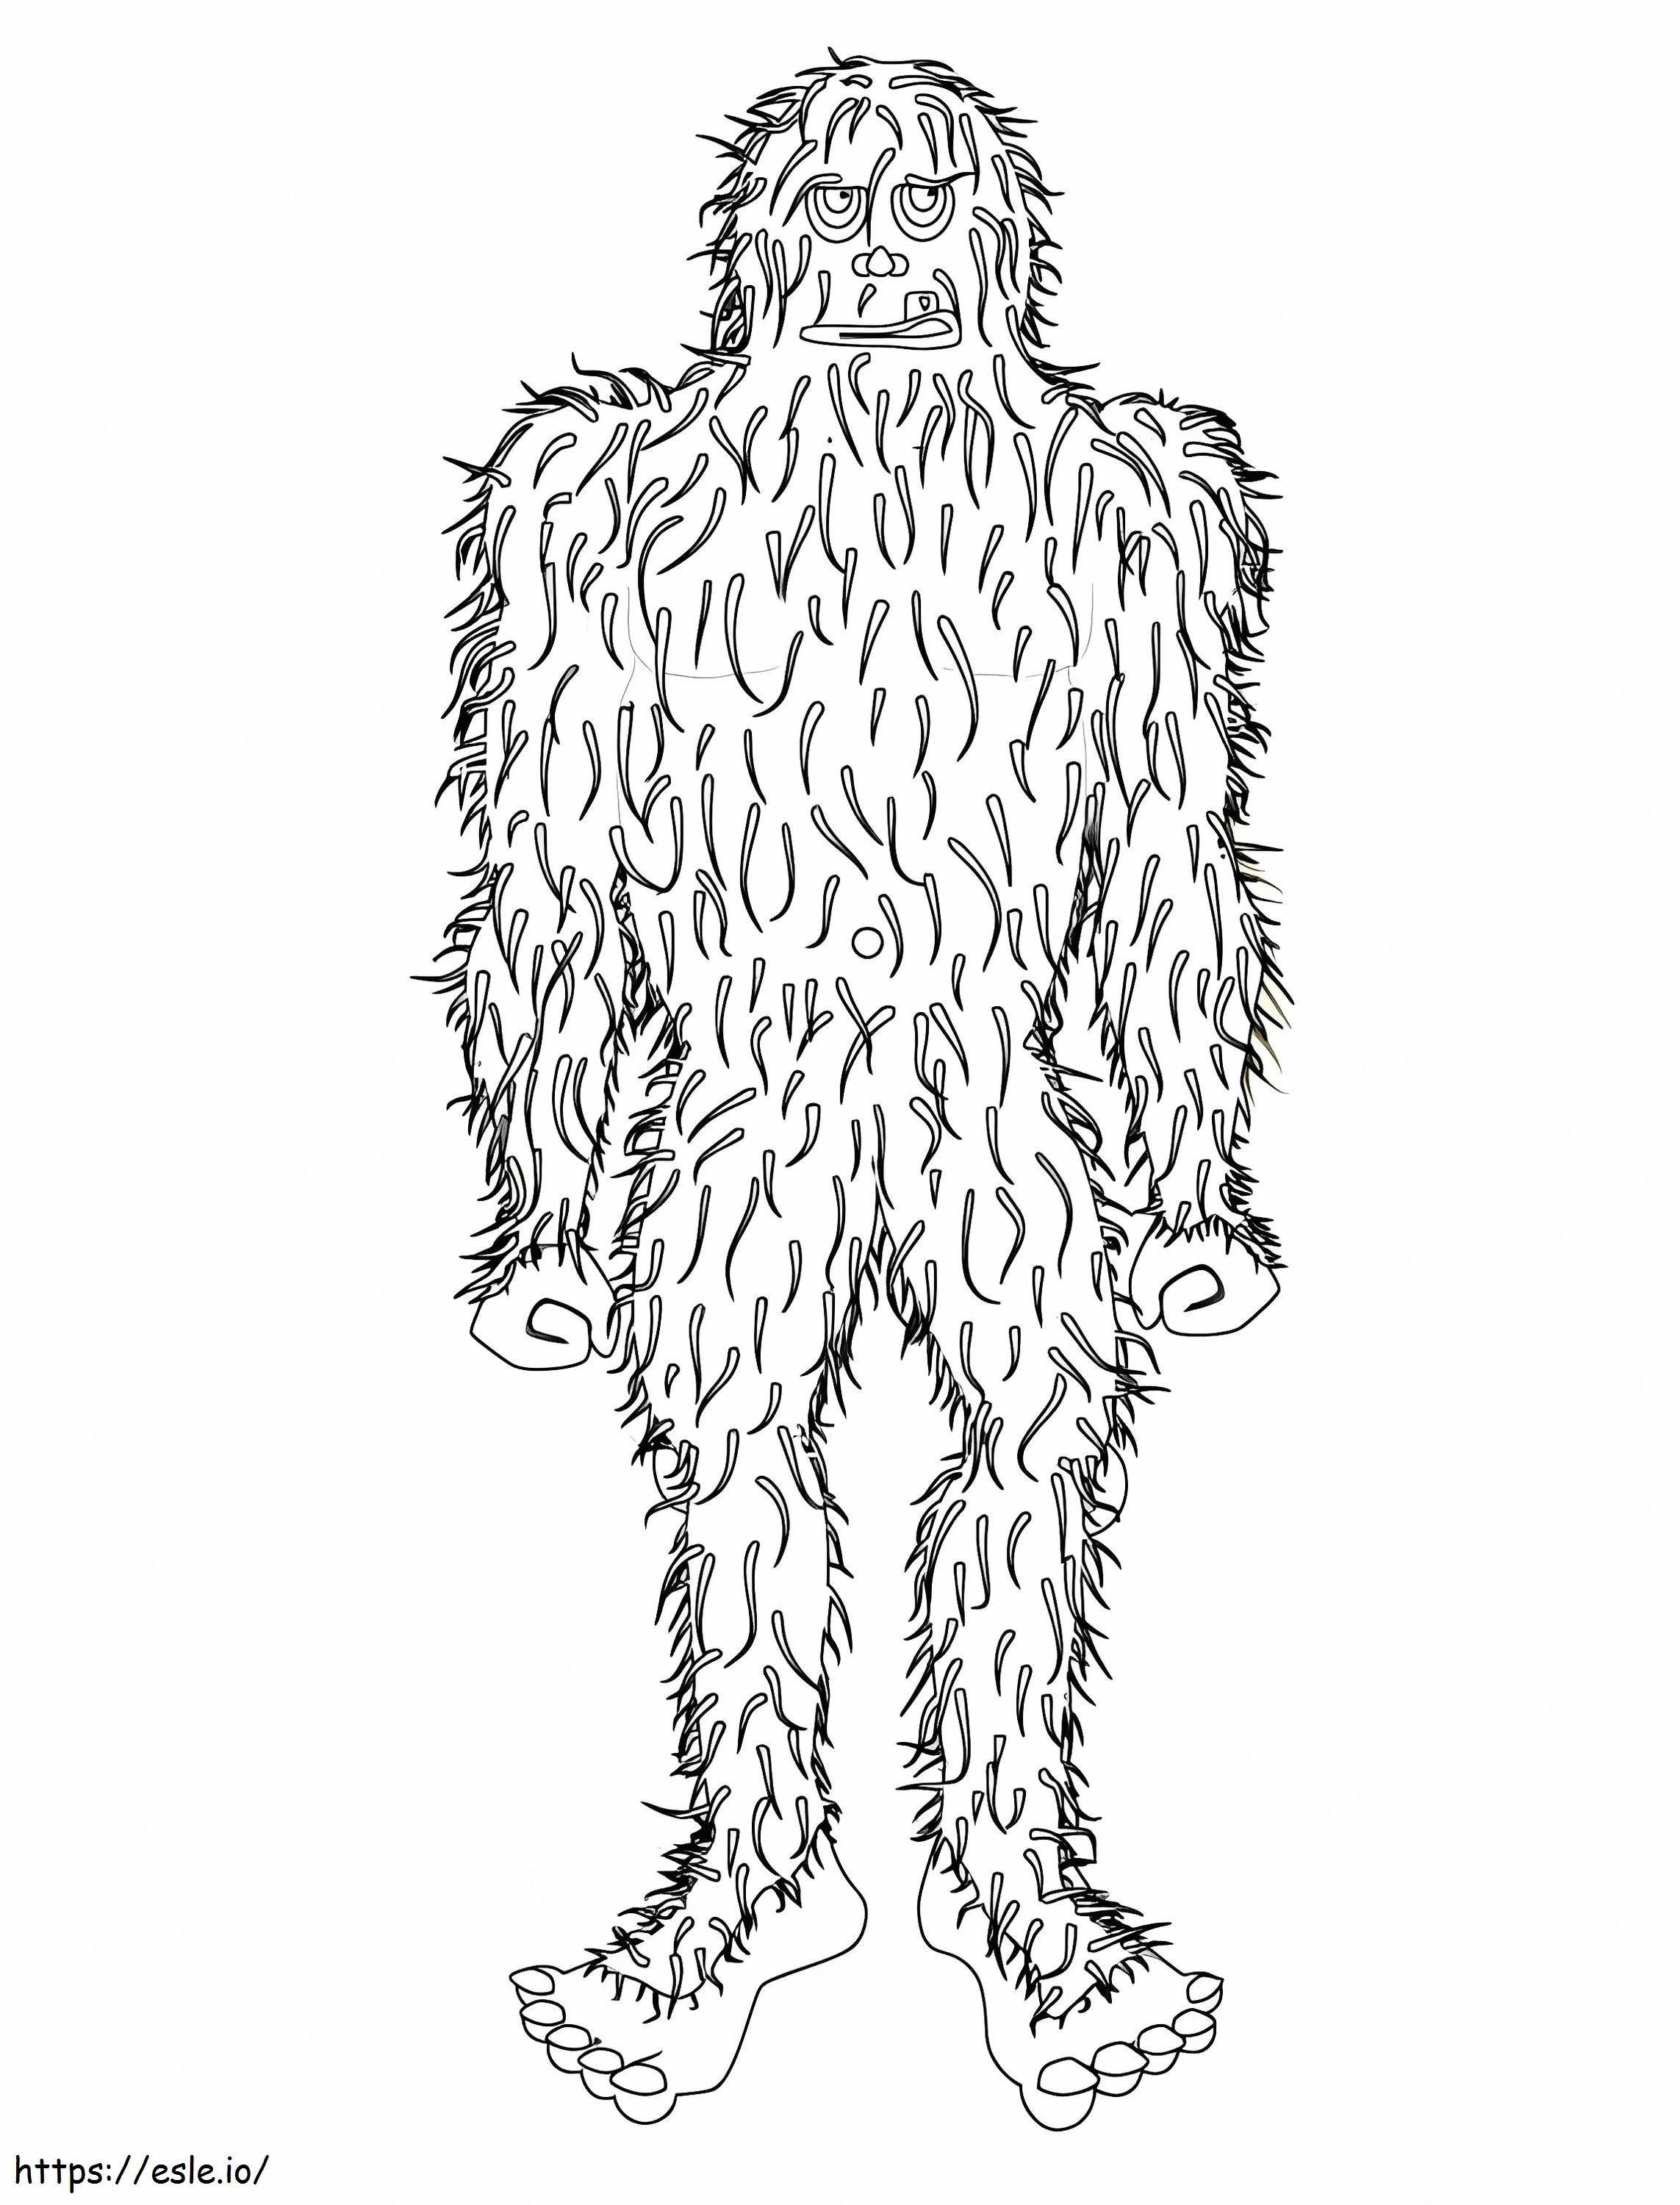 Mysterious Bigfoot 1 coloring page